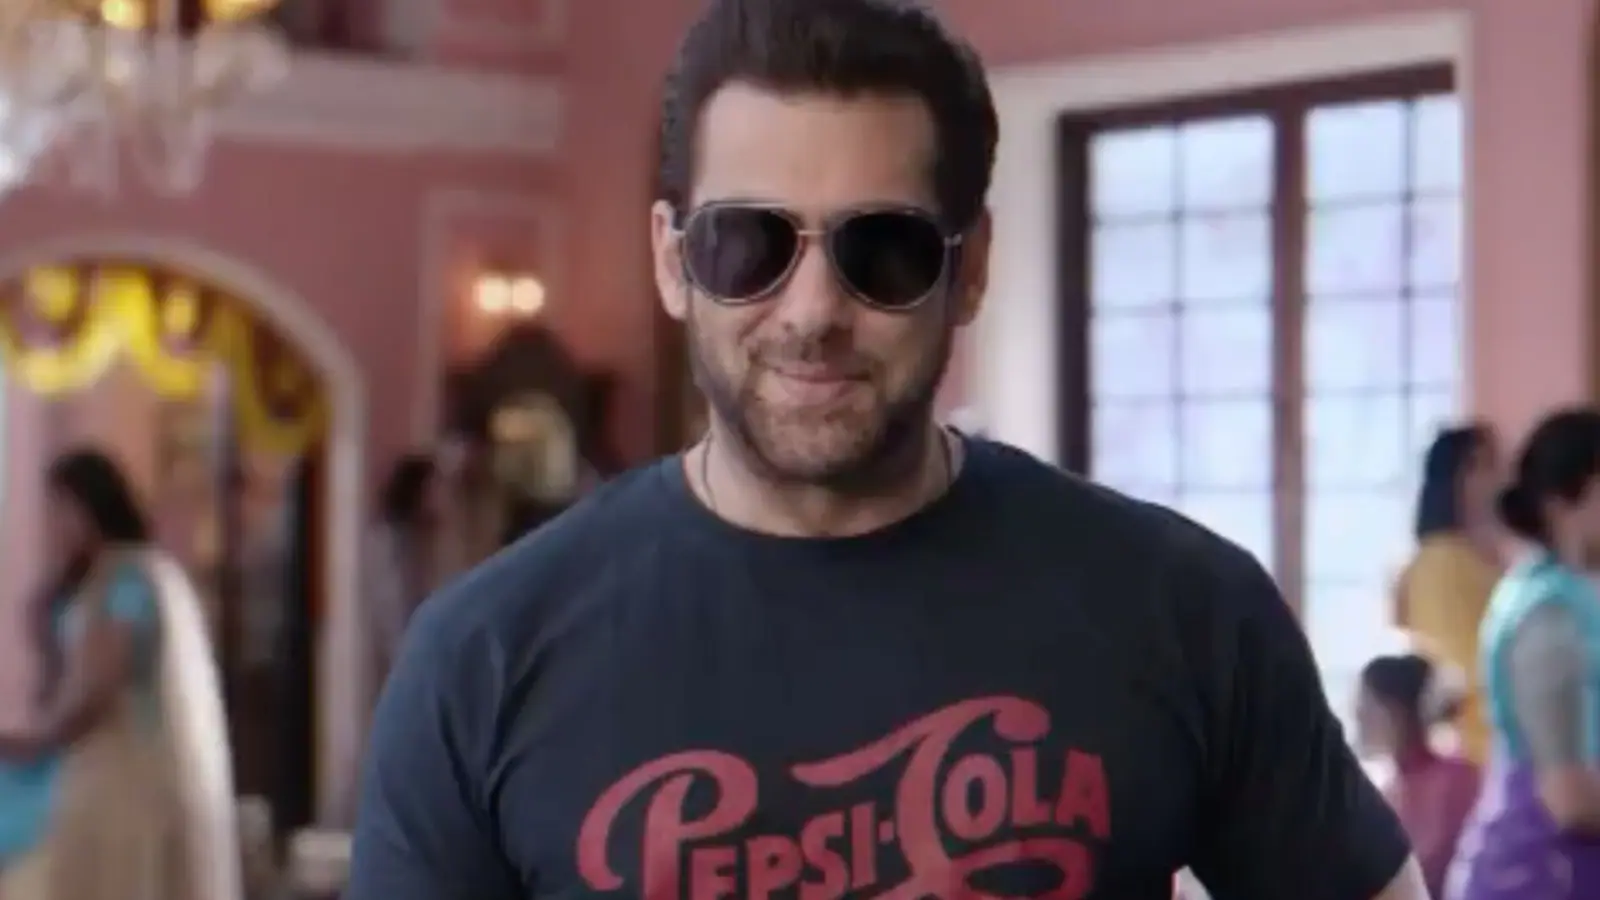 Salman Khan says all his girlfriends are now married in hilarious new video. Watch